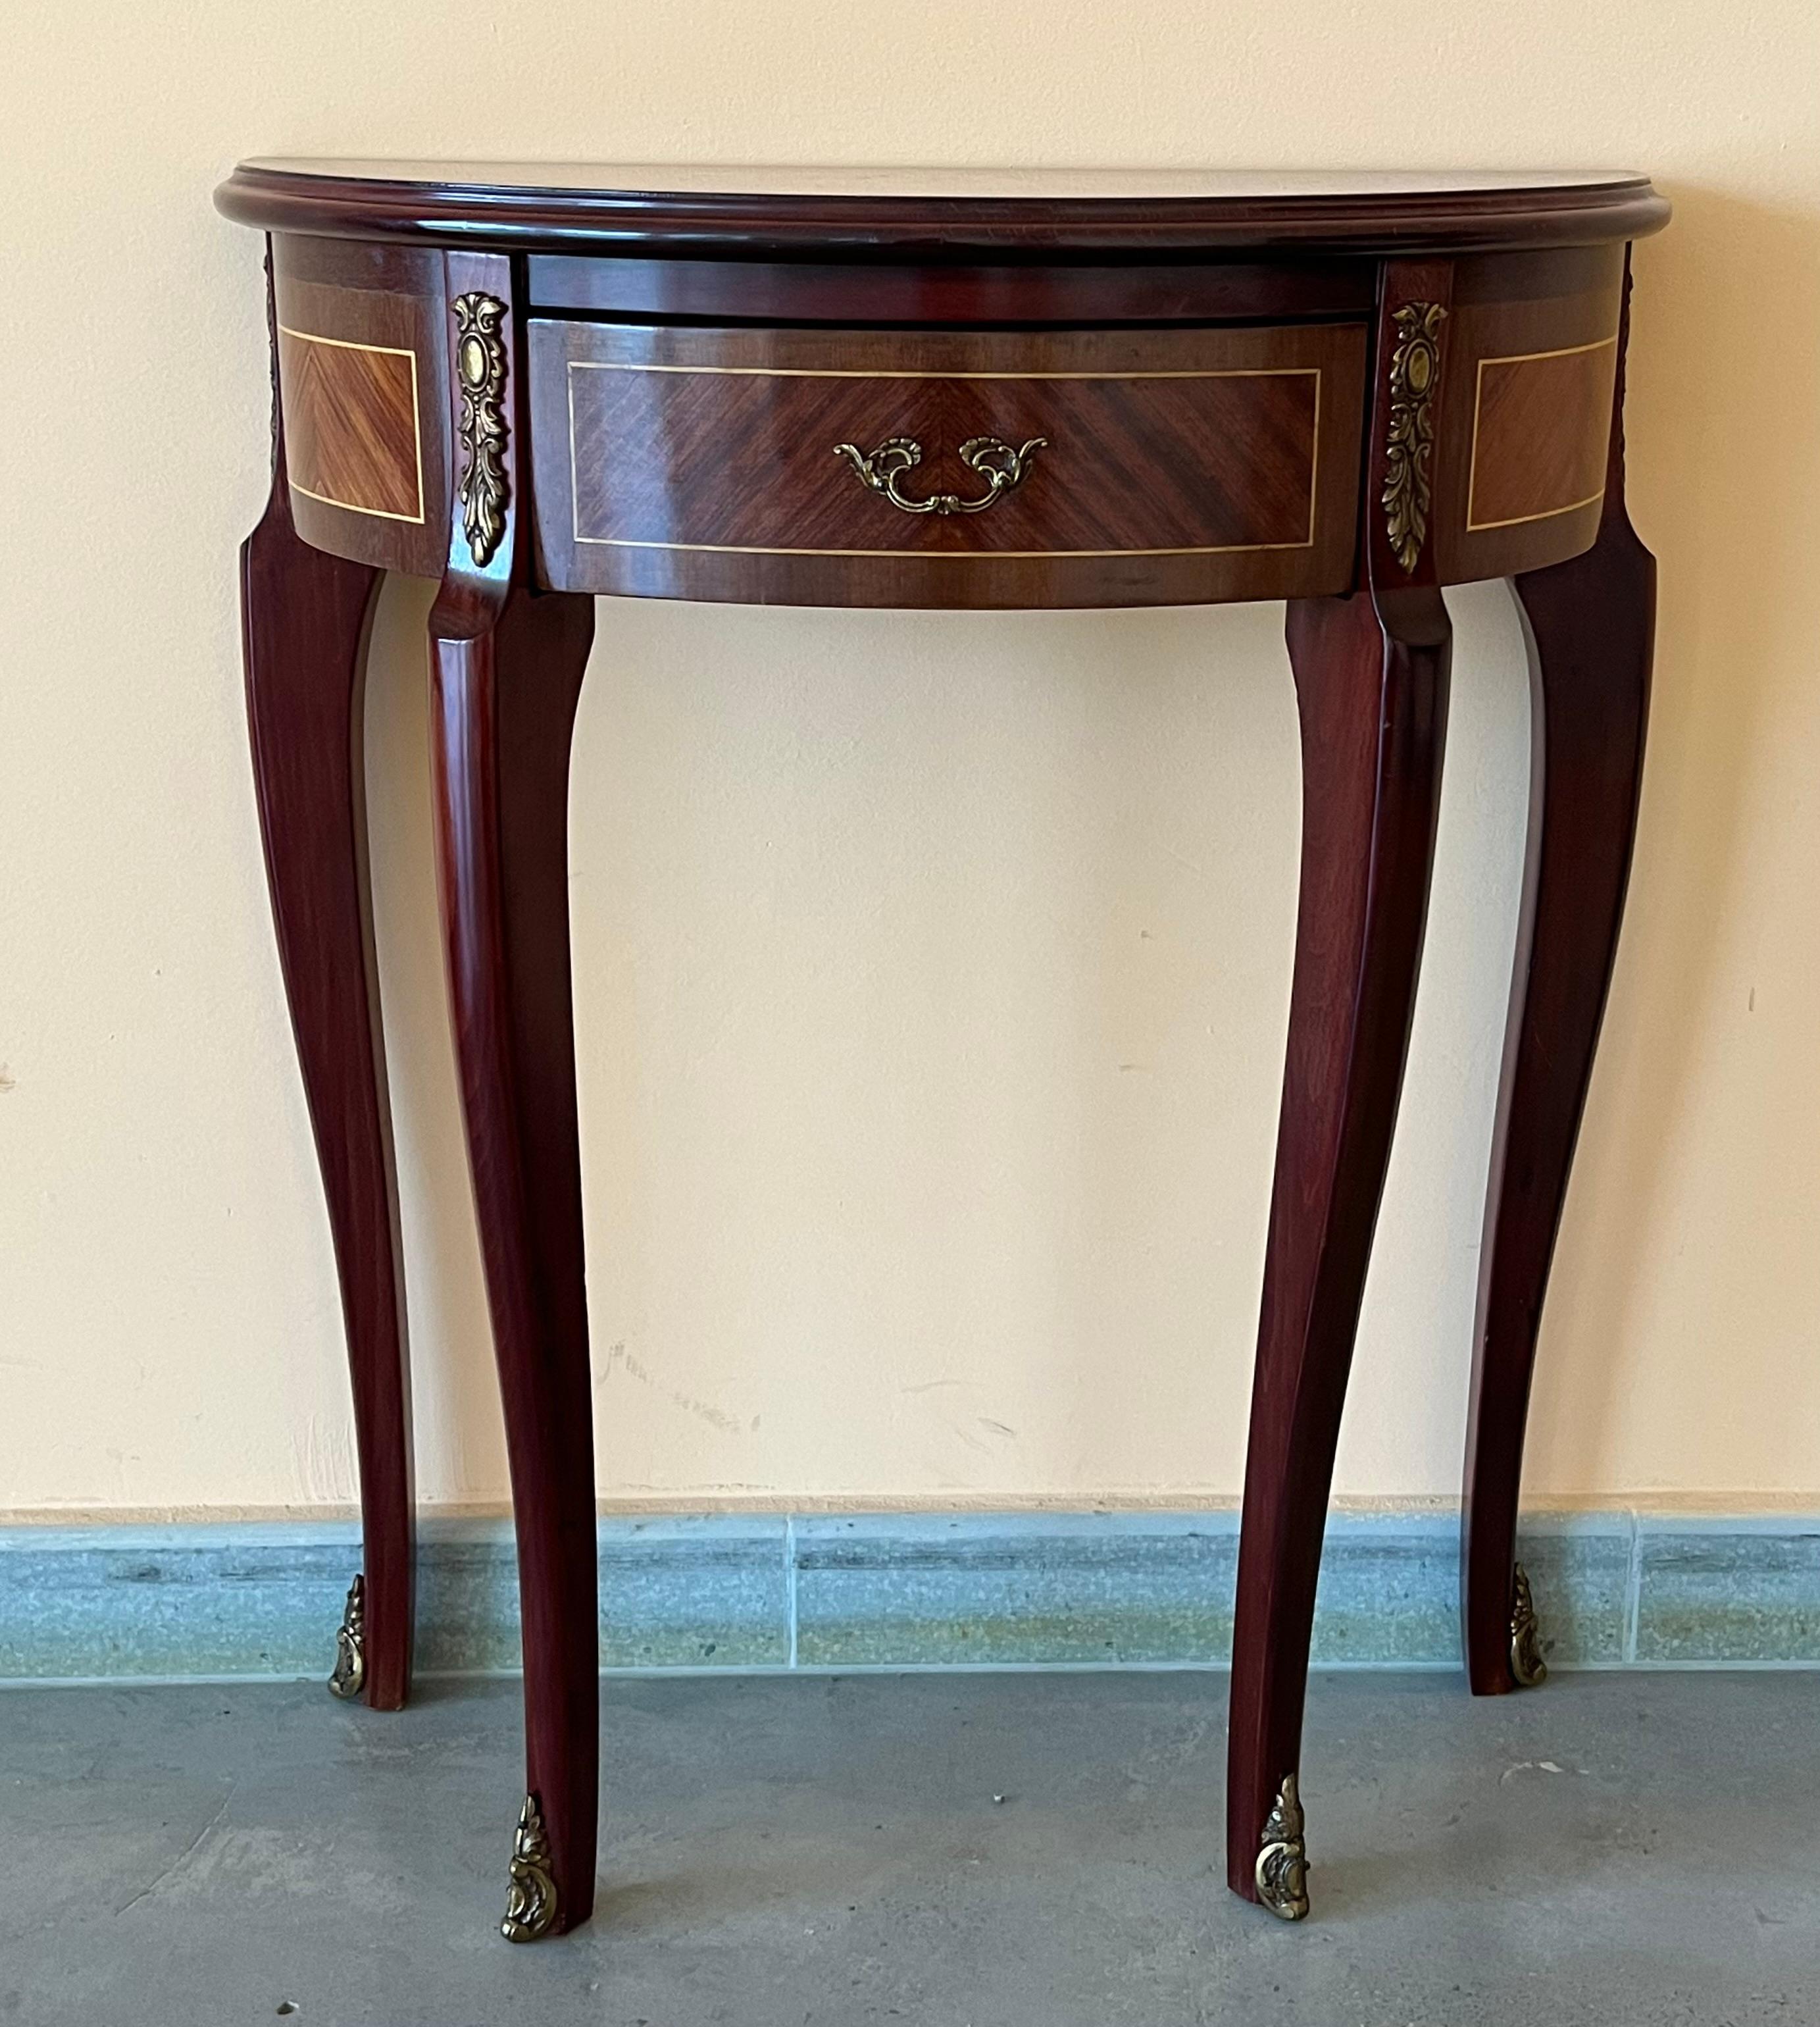 Elegant French inspired satinwood demilune console table with fine classical Floral marquetry inlay on the top, drawer and sides, raised on tapering legs with brass details.
You can use as nightstands, console, or side table.